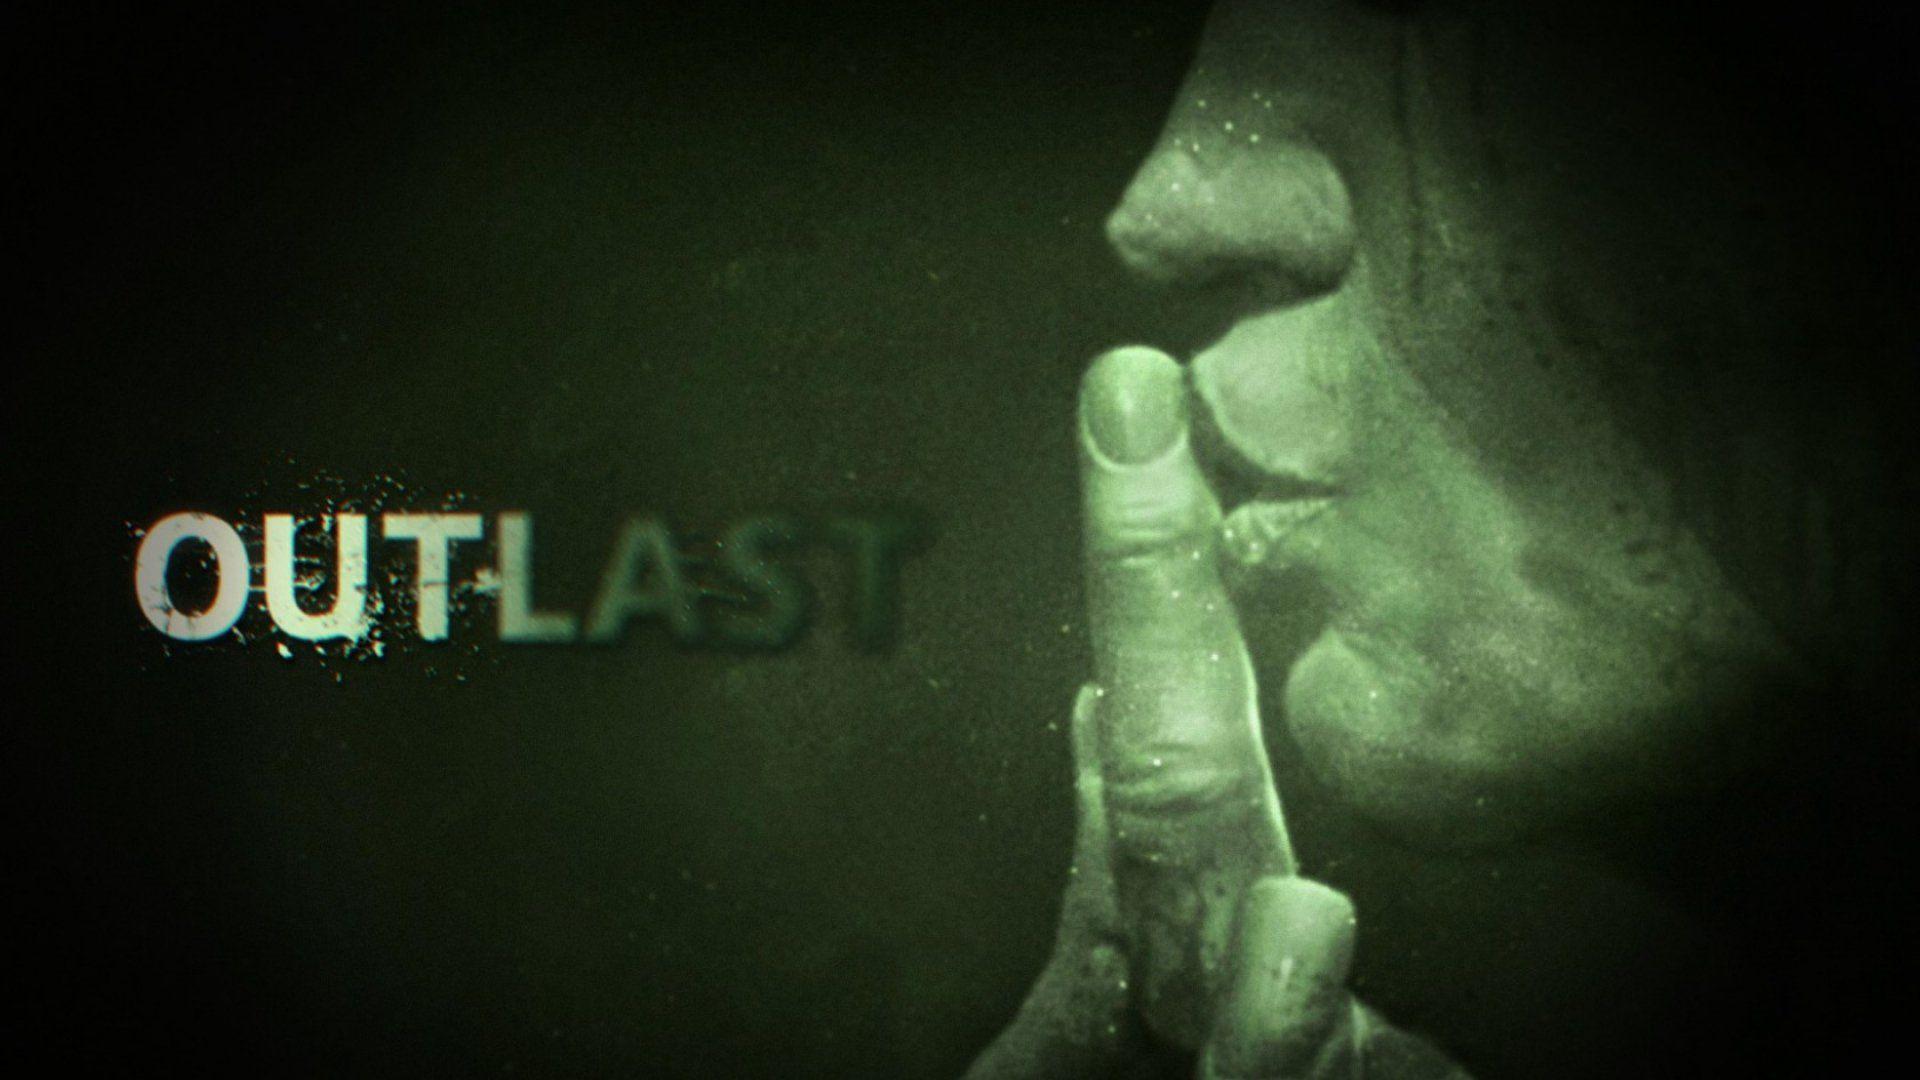 outlast download pc ocean of games